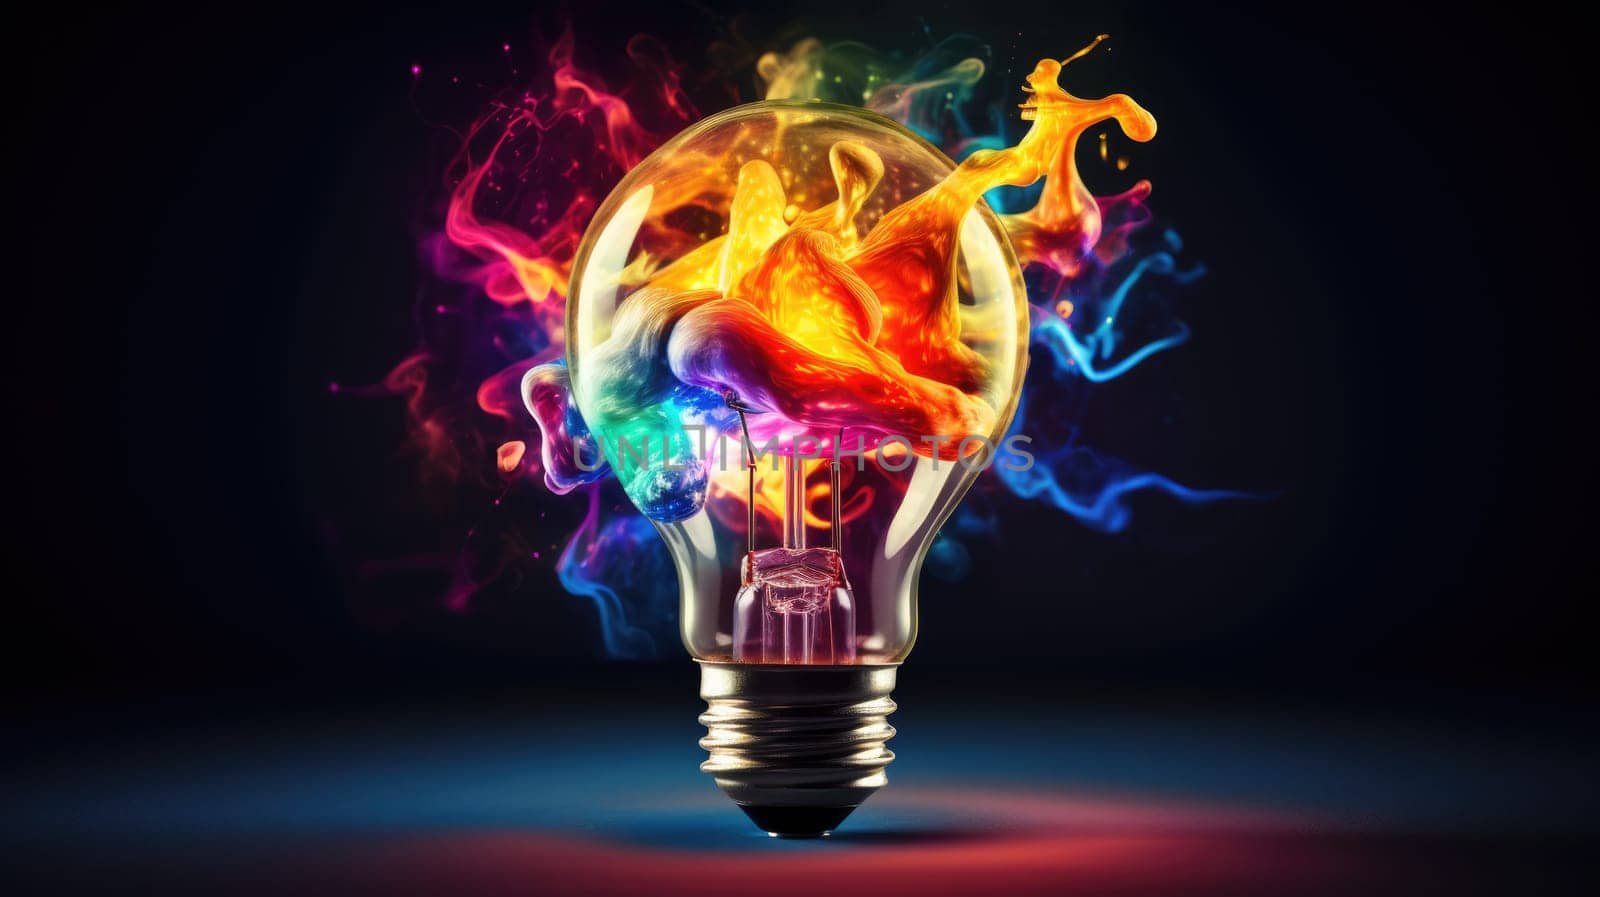 Creative light bulb explodes with colorful paint and colors by natali_brill